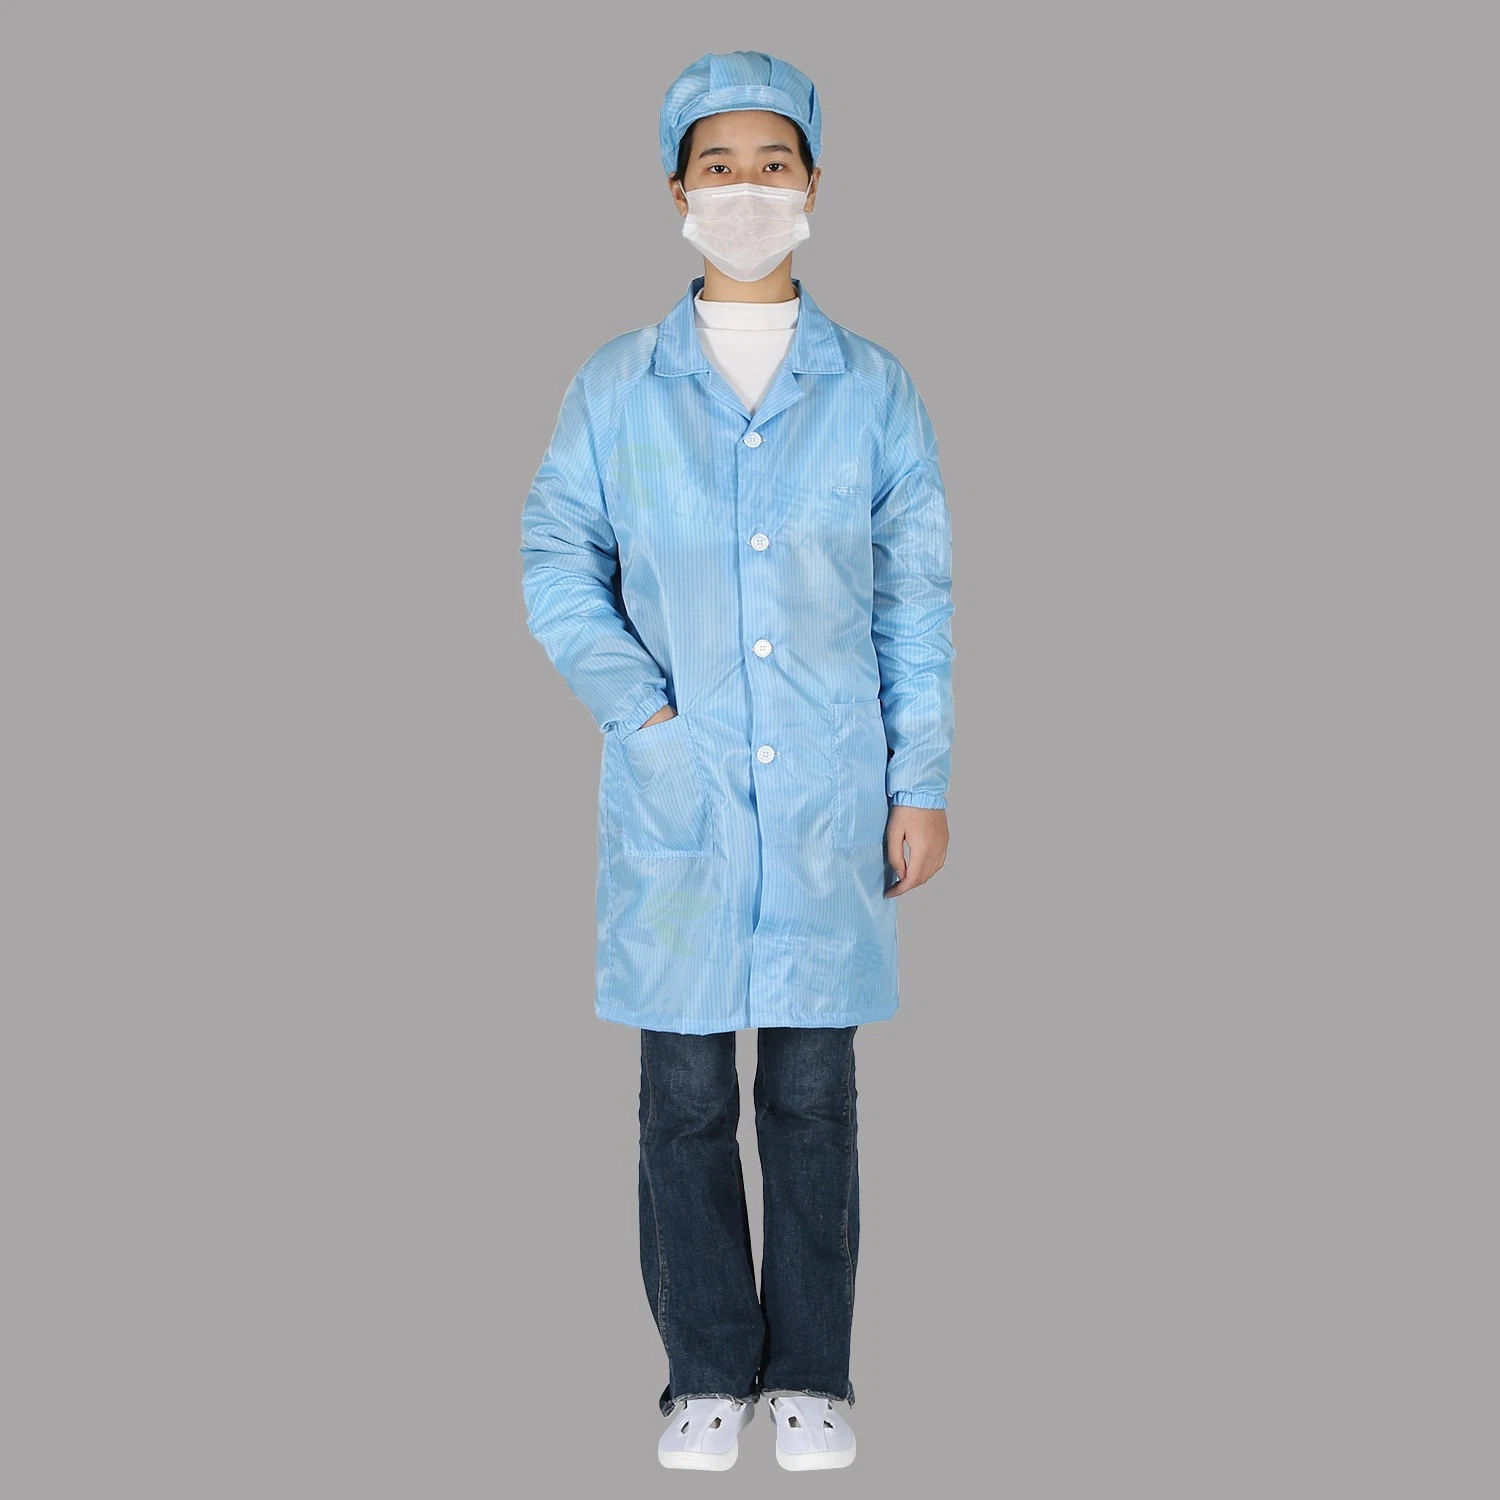 Blue 5mm Grid Coverall Reusable Cleanroom Work Clothes Antistatic ESD Garment Working Lab Coat